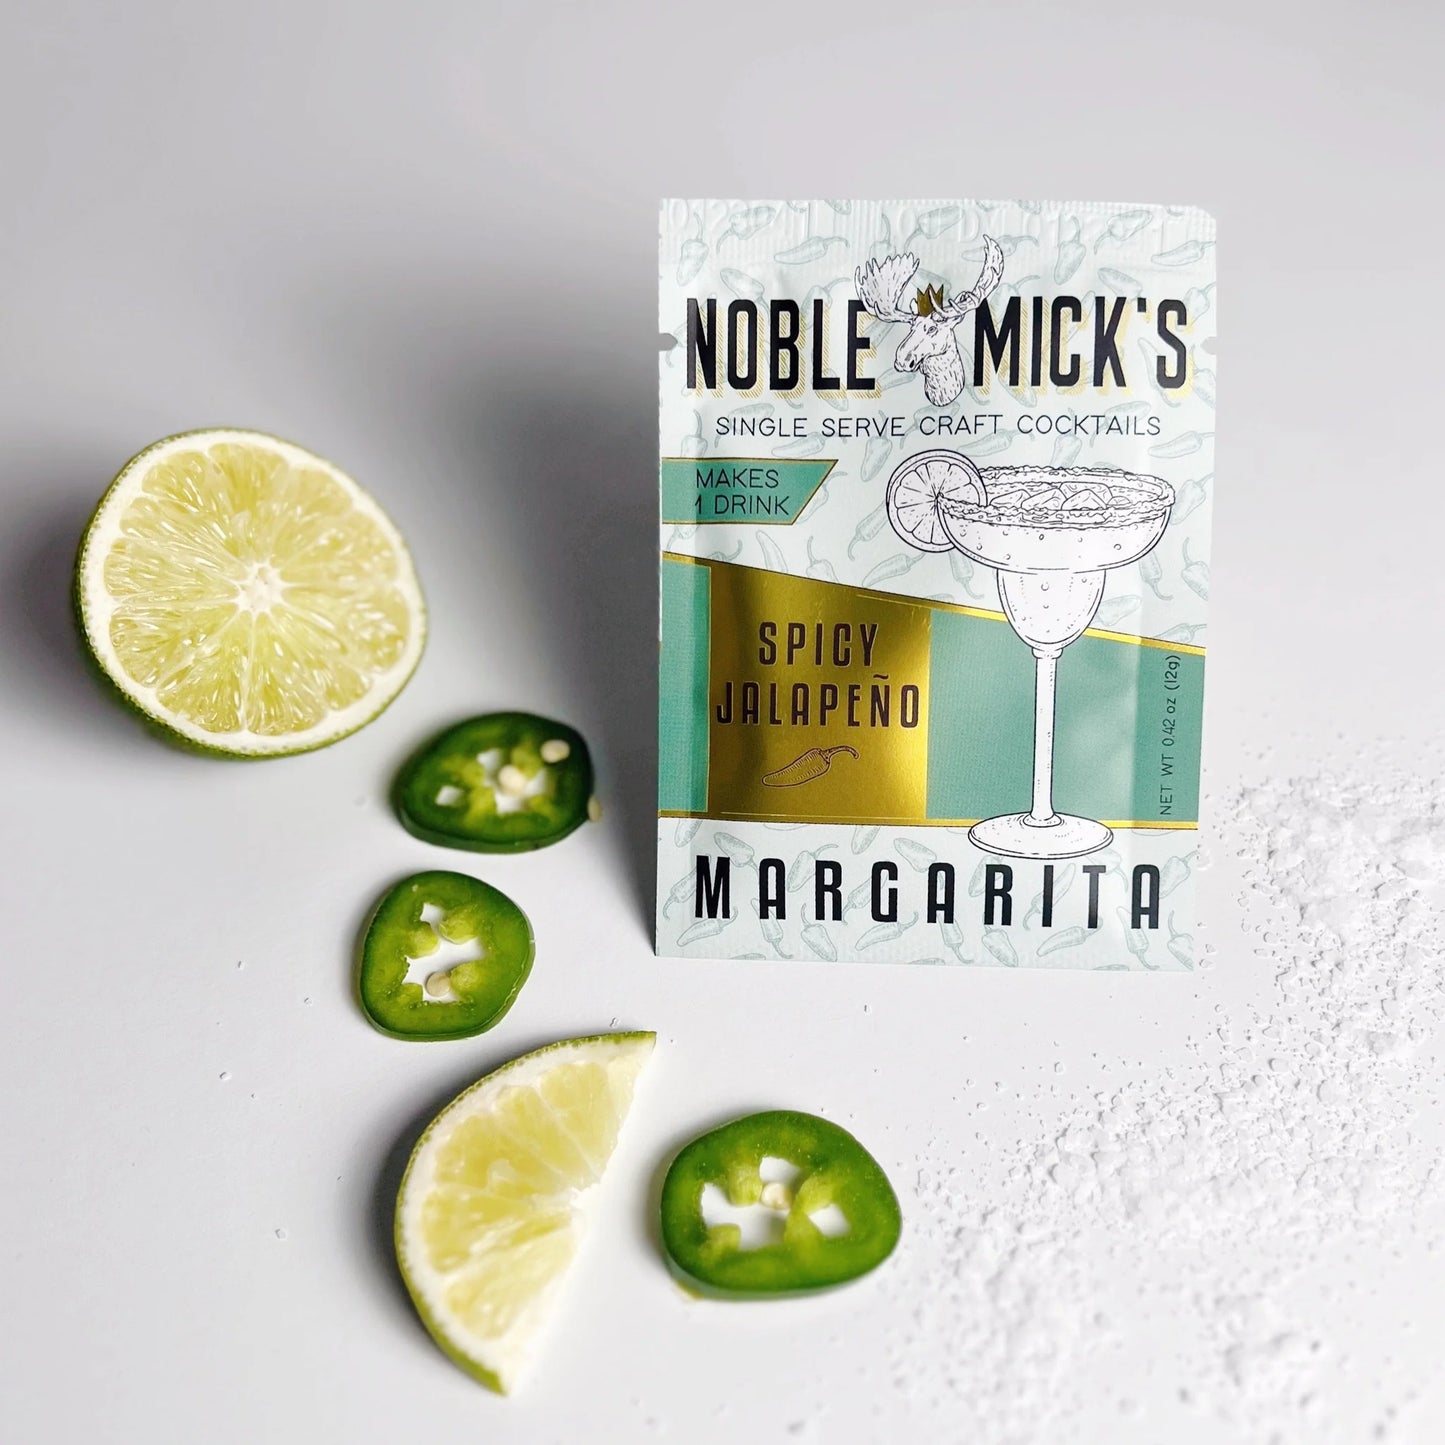 Noble Mick's - SPICY JALAPENO MARGARITA - SINGLE SERVE CRAFT COCKTAIL MIX